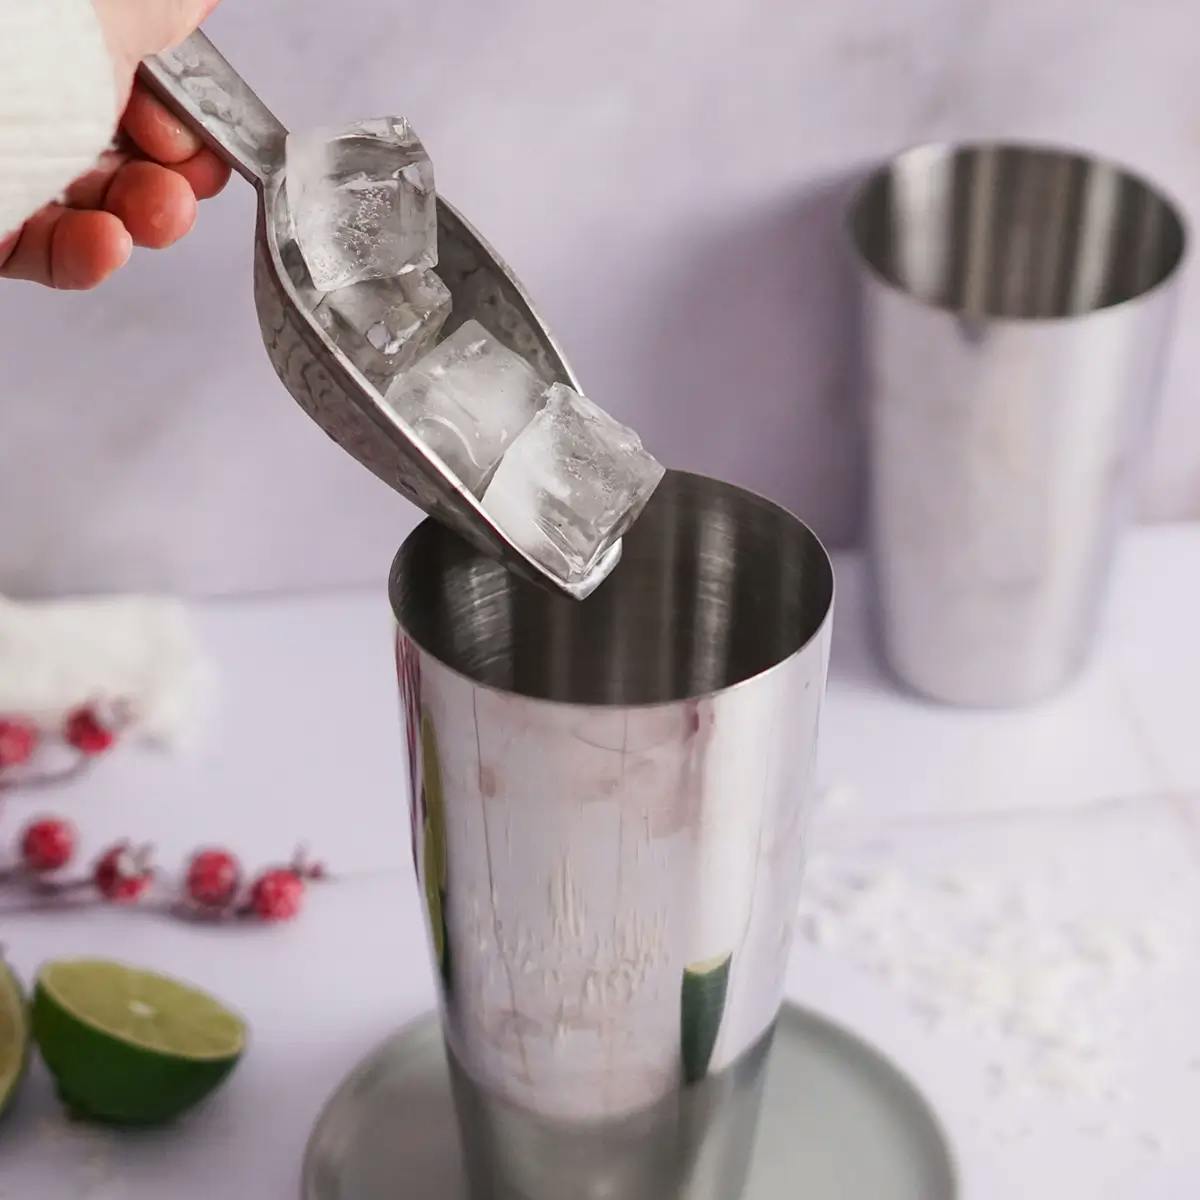 A hand adding ice to a shaker filled with the ingredients for a White Christmas Margarita cocktail.